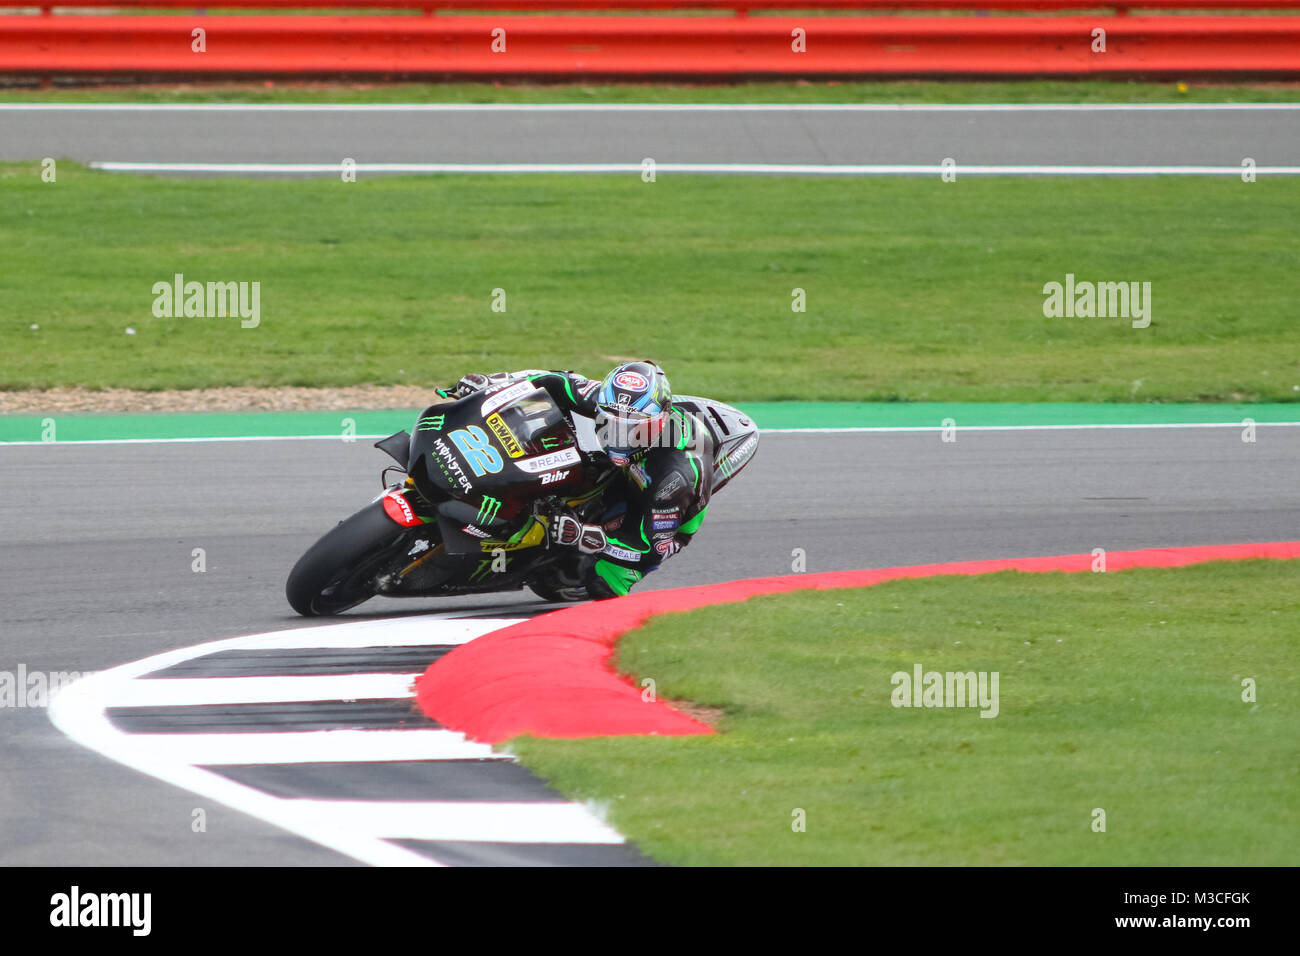 Alex Lowes exiting Vale corner during Friday Free Practice at the MotoGP British Grand Prix 2016 Stock Photo